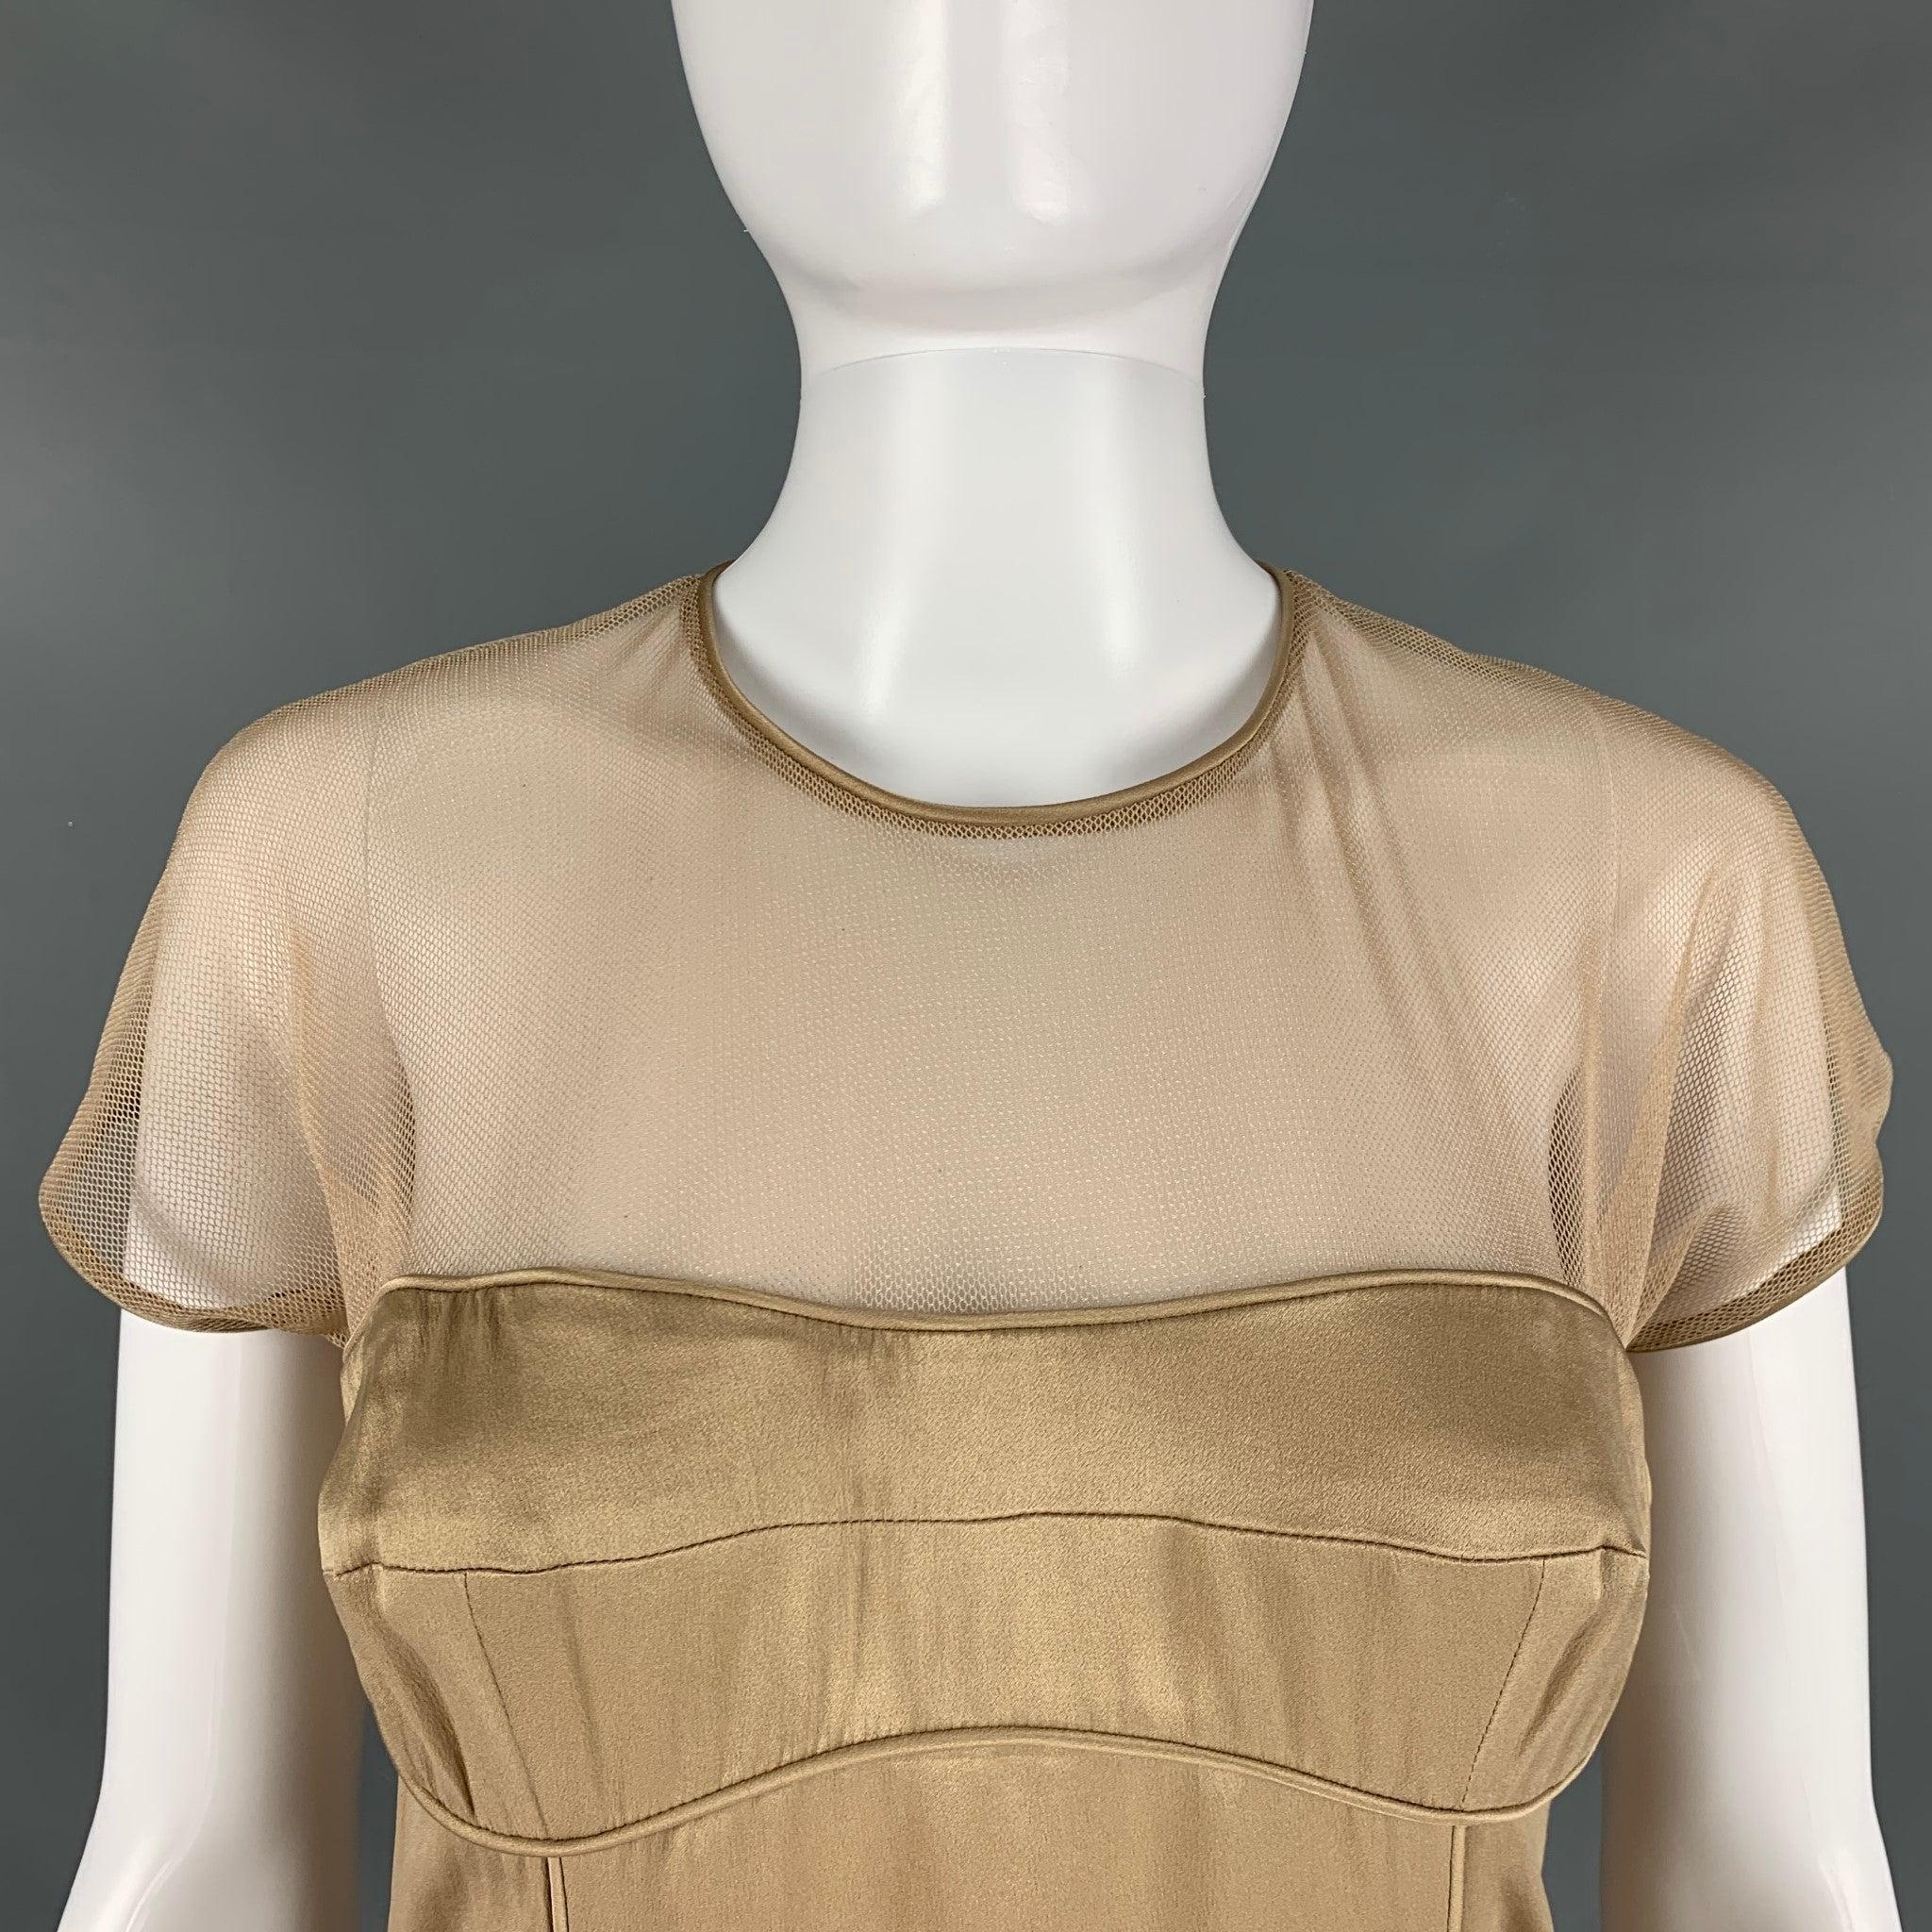 BURBERRY PRORSUM dress comes in a beige silk woven material featuring a piping detail neck and sleeves cuff, mesh top, bustier style, and a back zip up closure. Made in Italy. Excellent Pre-Owned Condition. 

Marked:  IT 44 

Measurements: 
